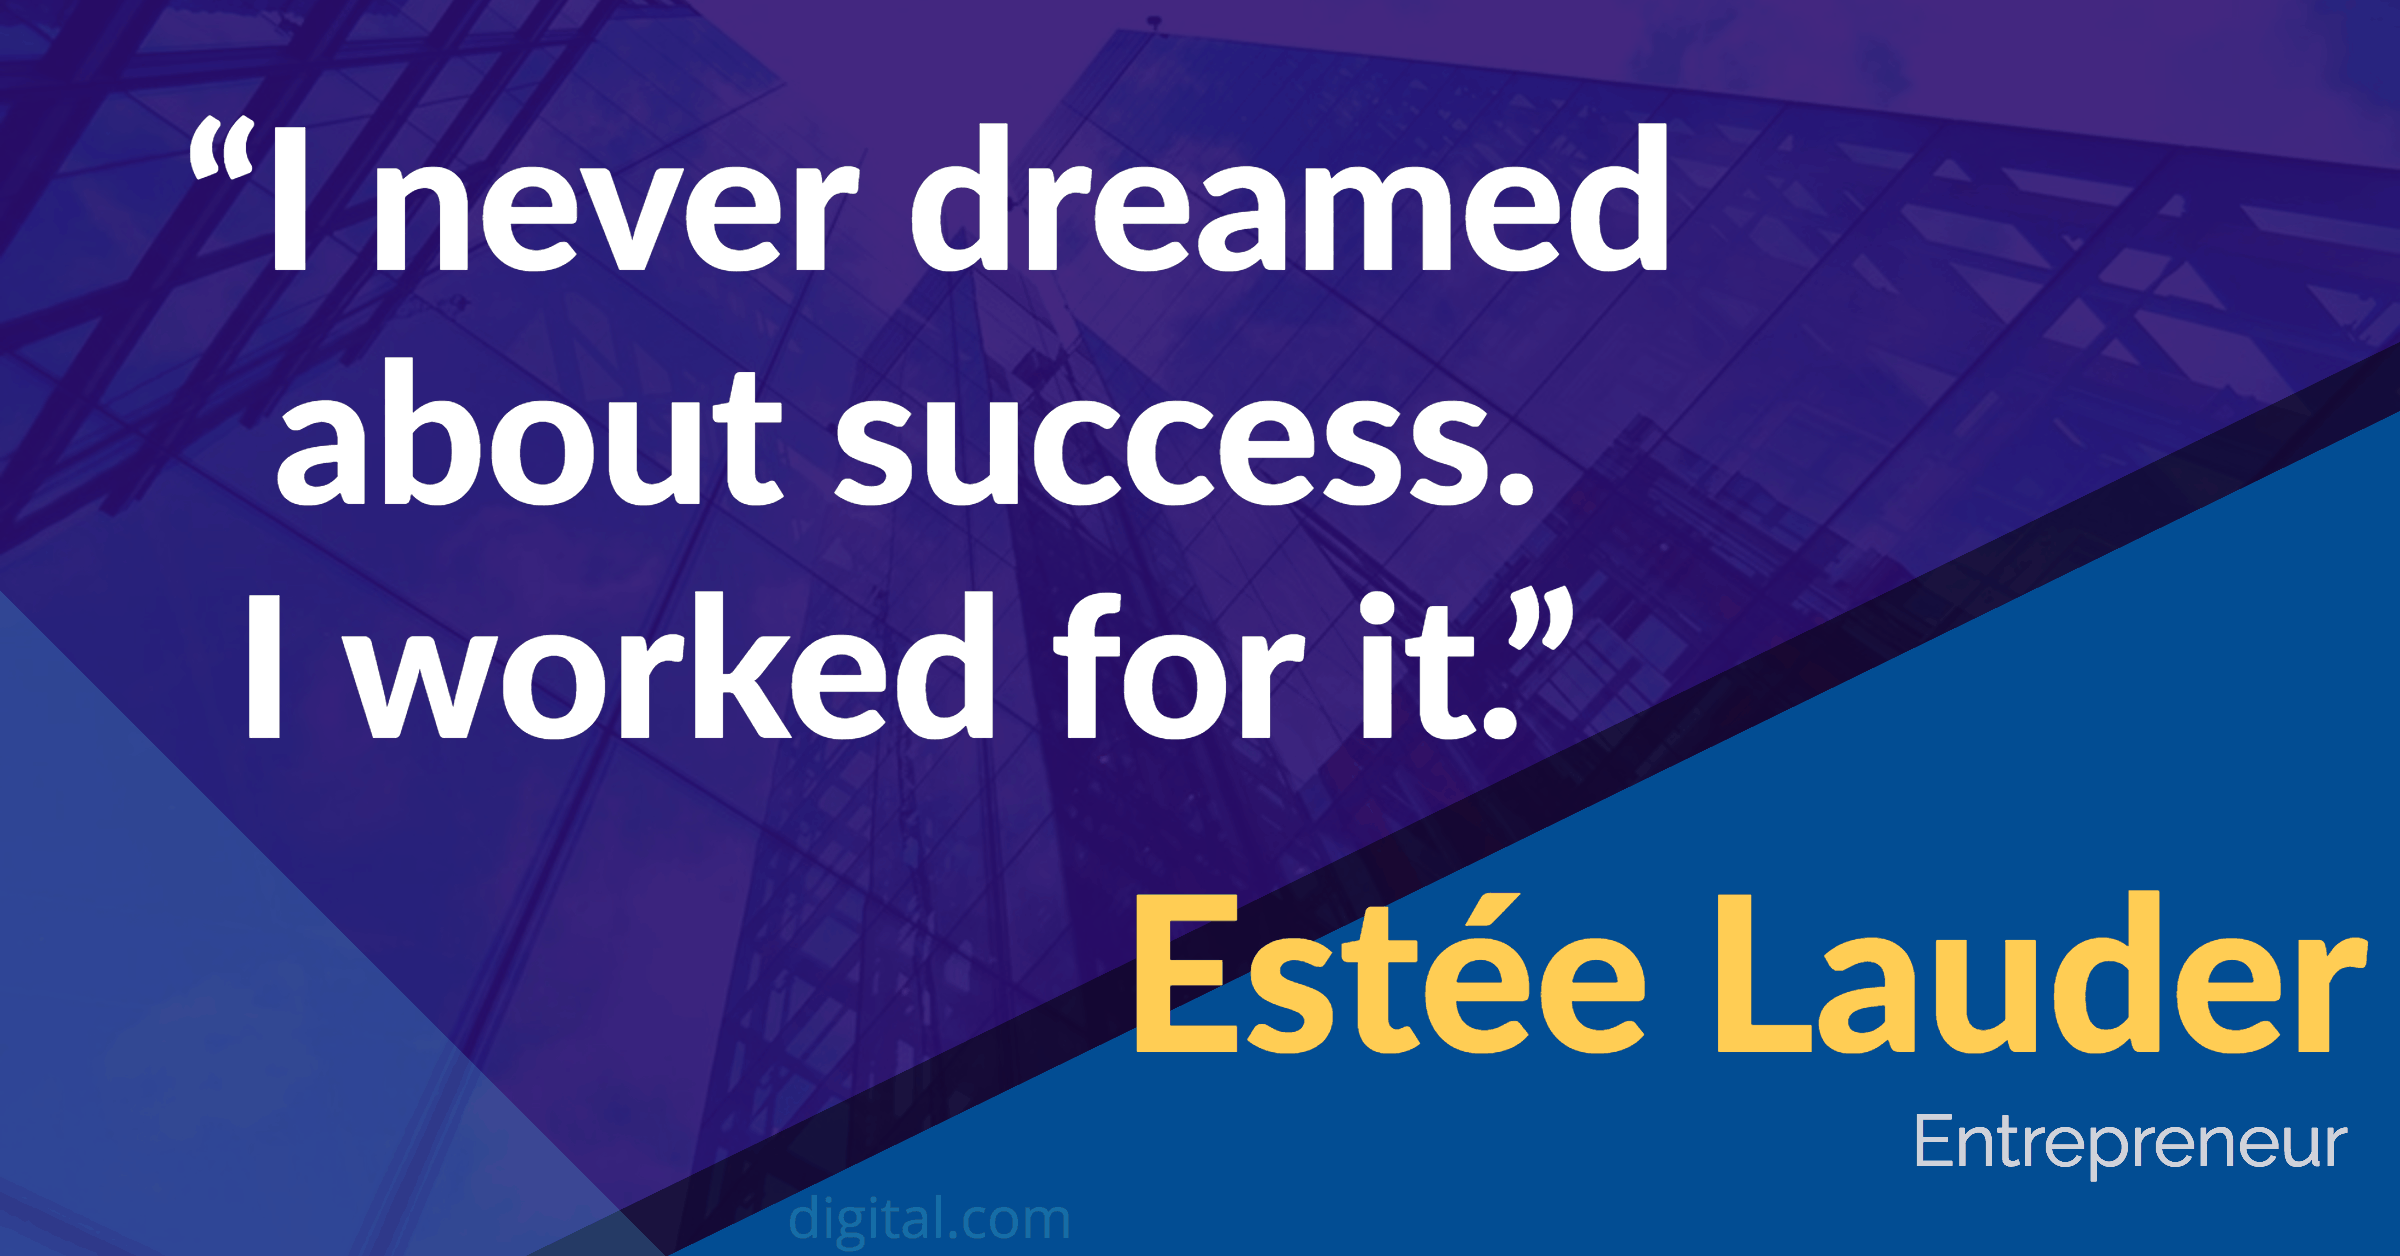 i never dreamed about success. i worked for it. estee lauder